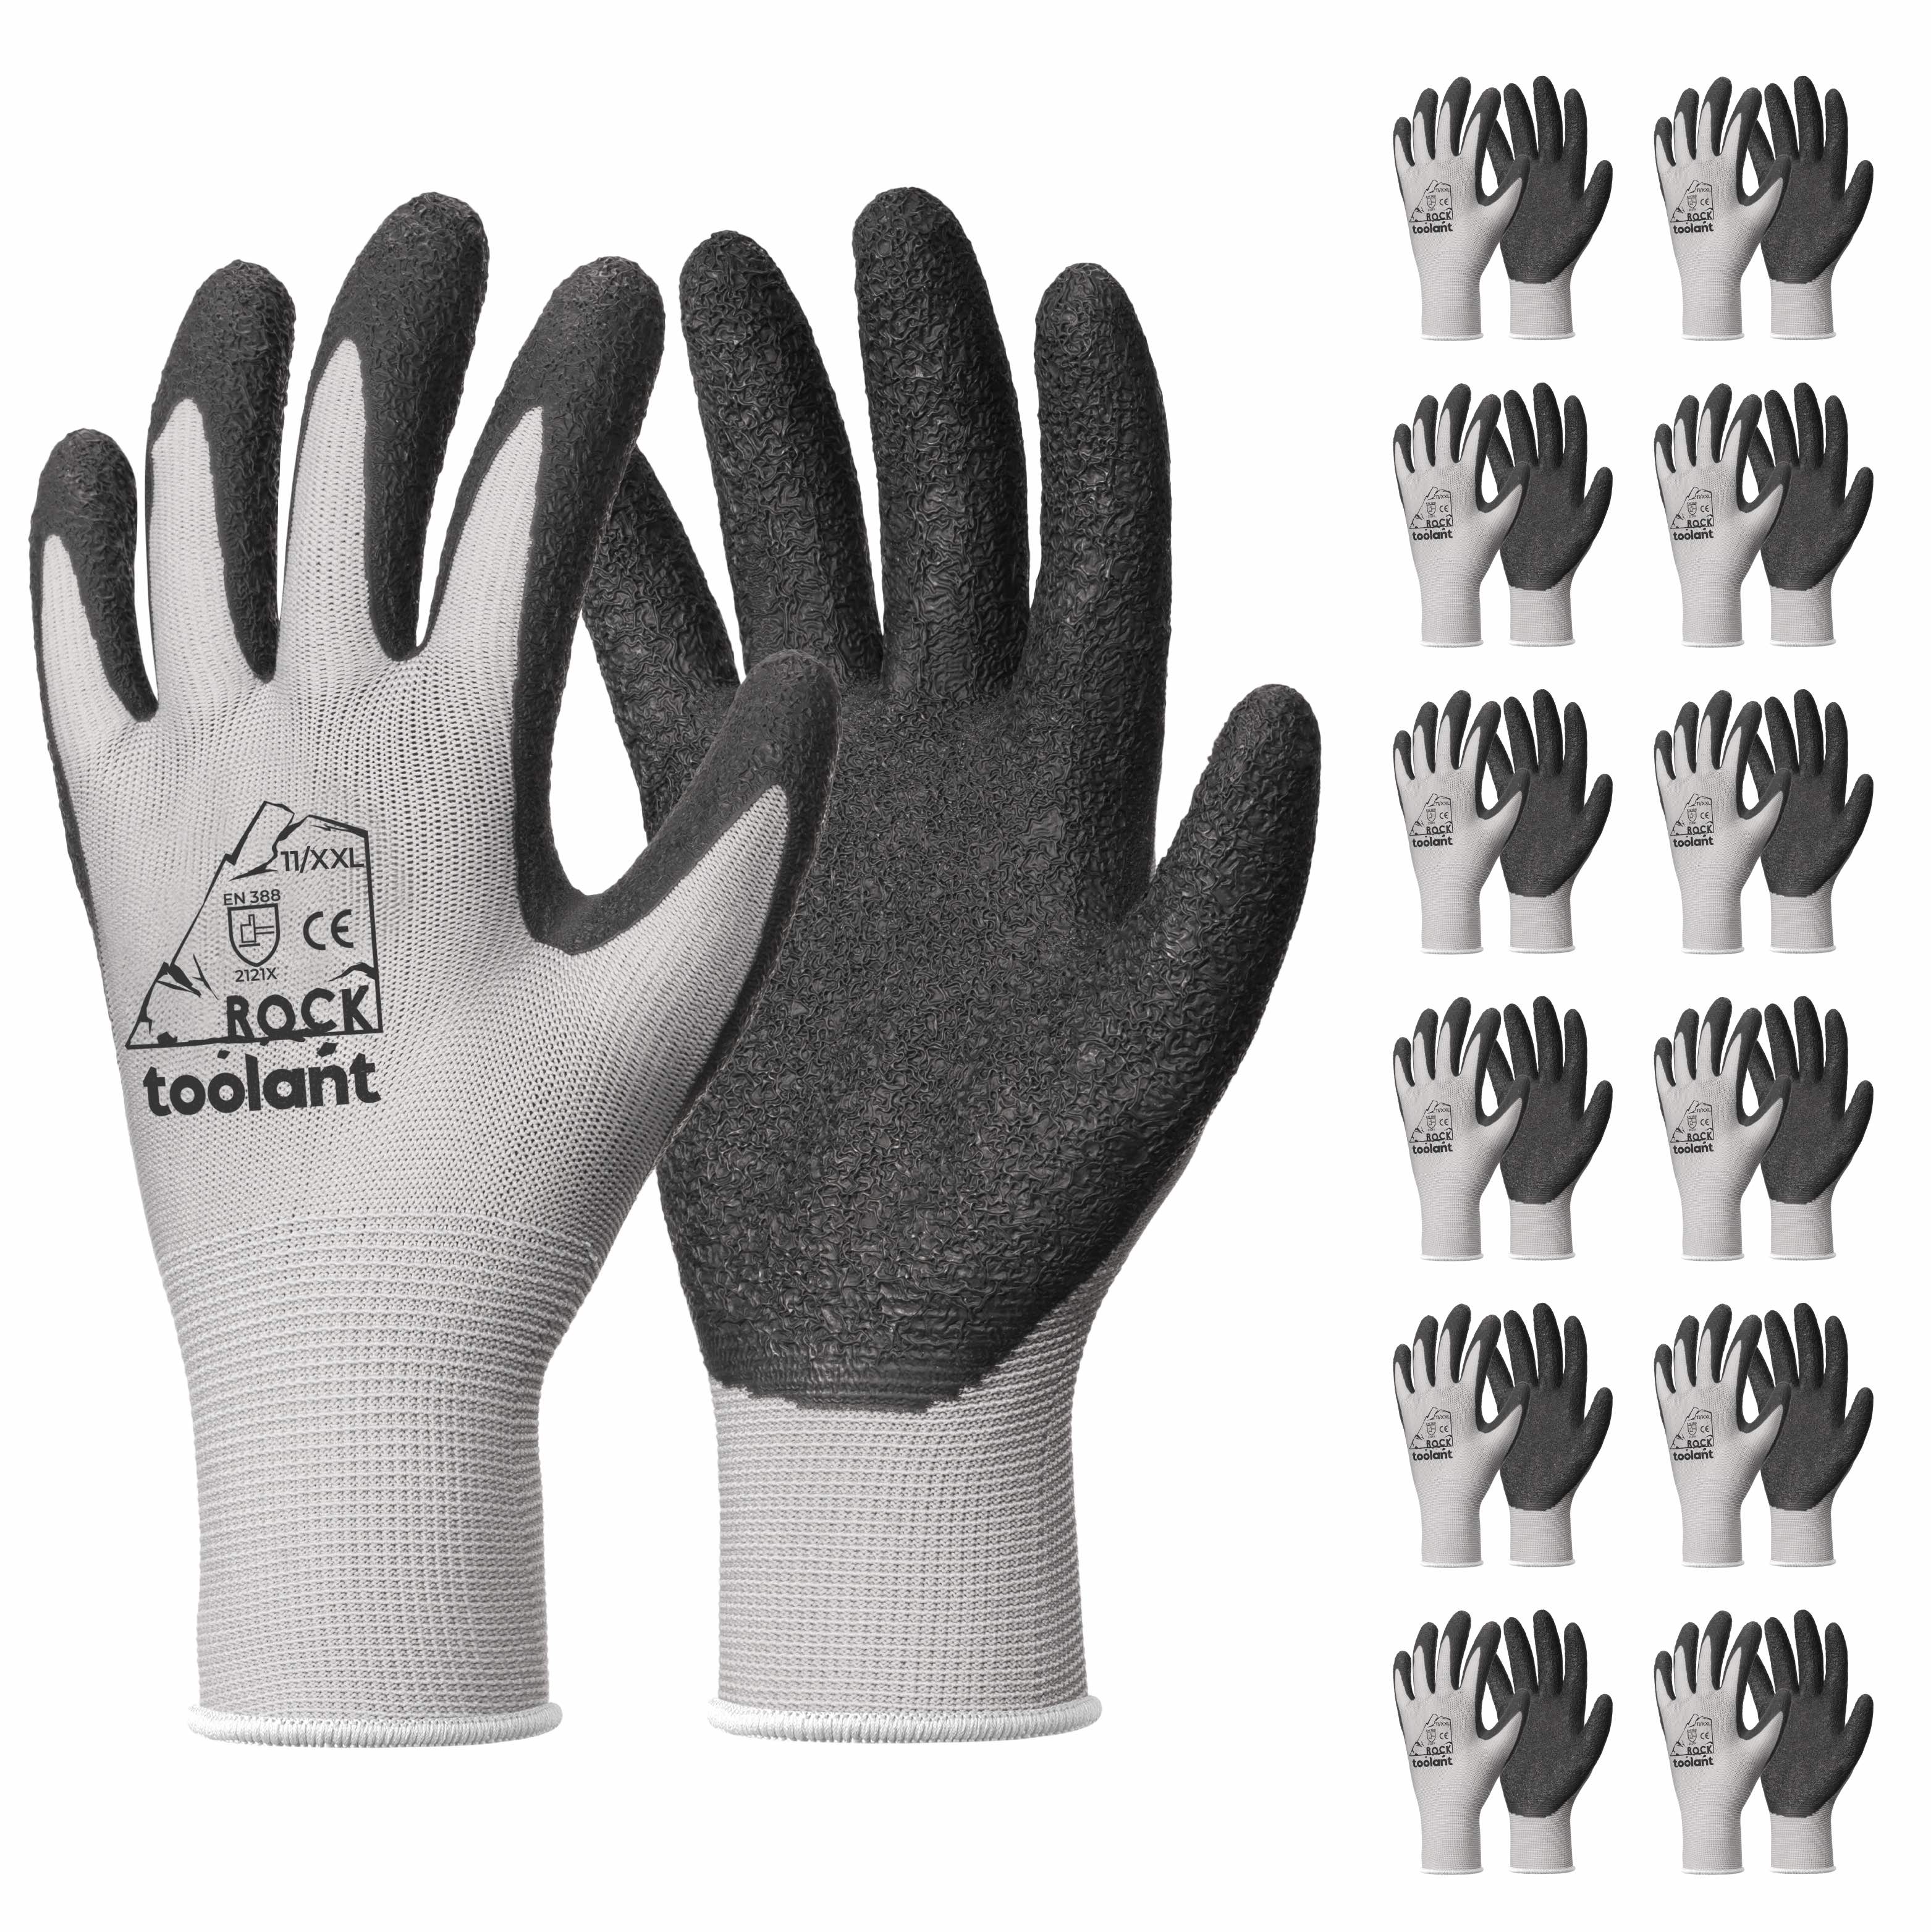 12 Pairs Crinkle Latex Rubber Hand Coated Safety Work Gloves for Men Women  General Multi Use Construction Warehouse Gardening Assembly Landscaping